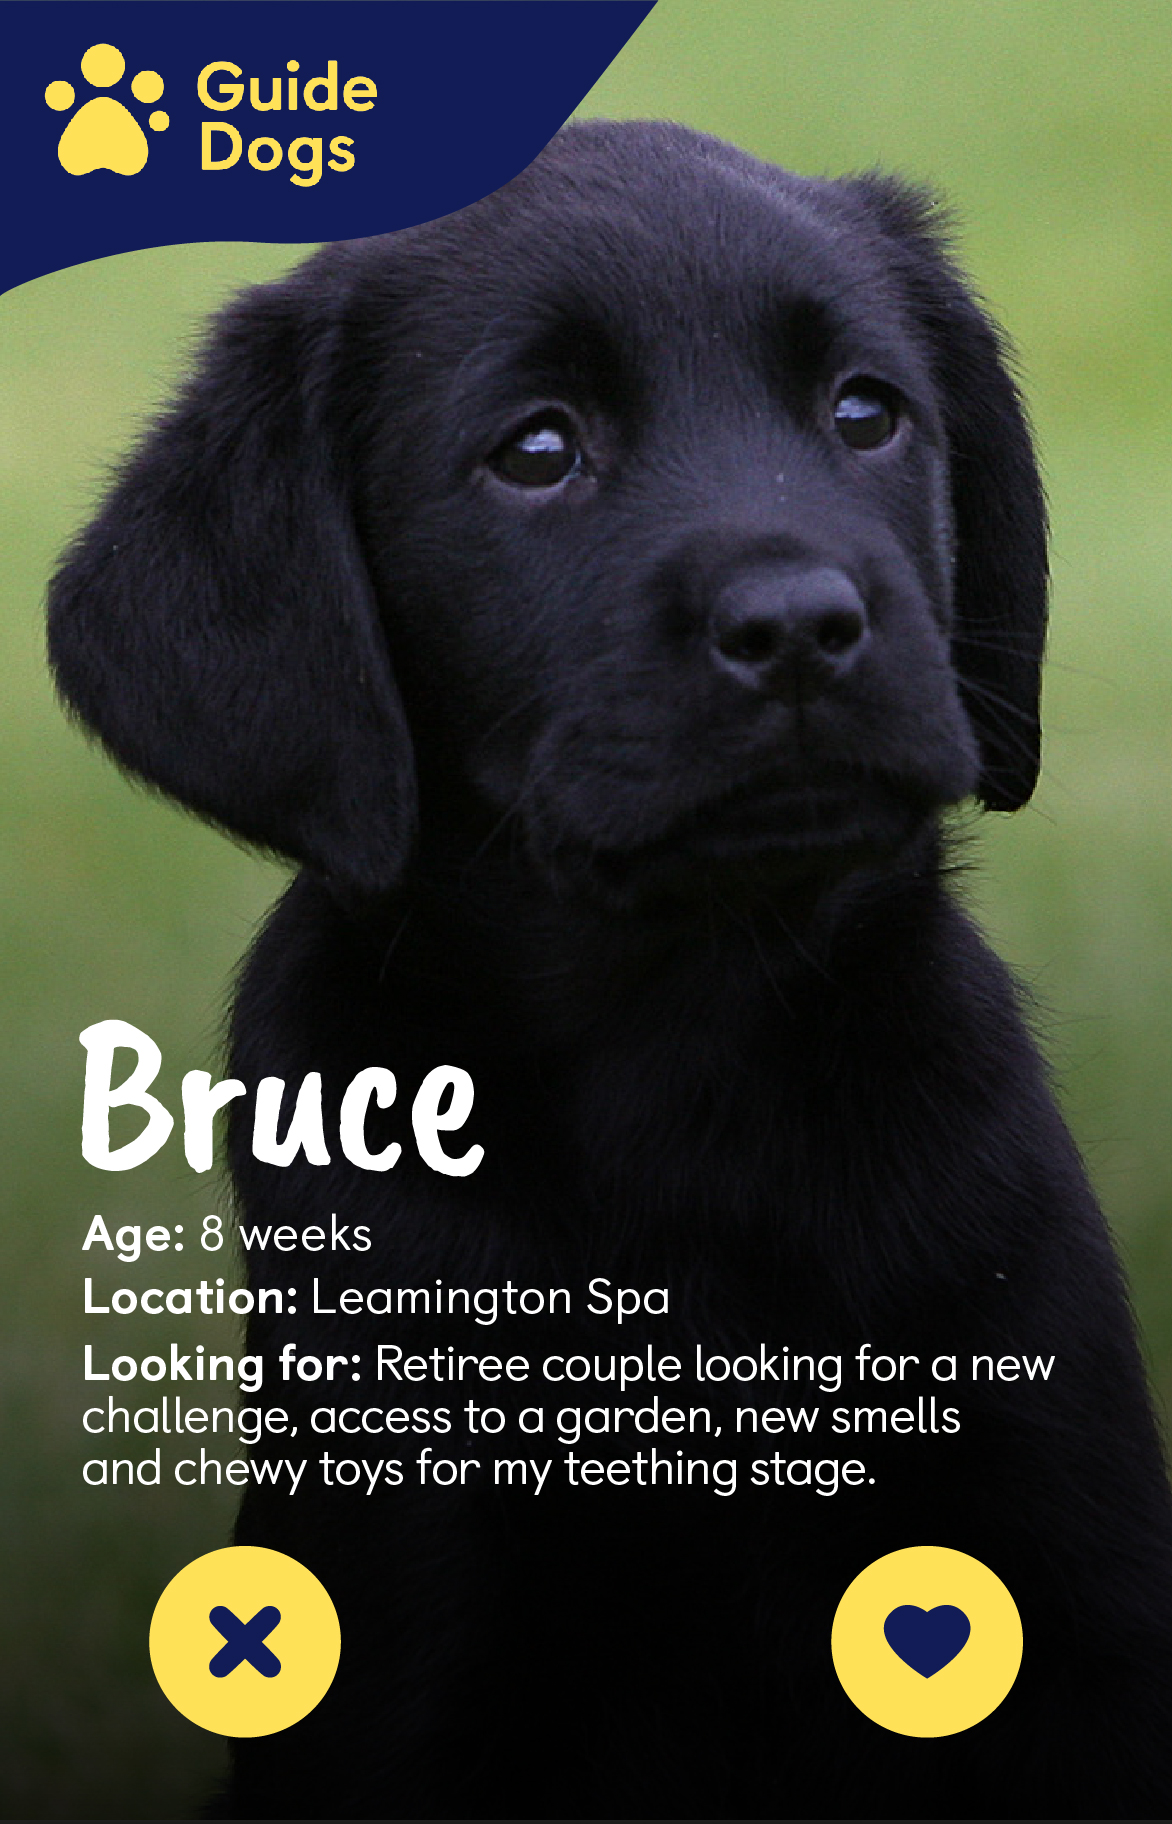 Image of a black labrador puppy against a green background in the style of a dating-app profile with Guide Dogs logo in the top right hand corner and text across the bottom half. Text says: Bruce, Age: 8 weeks , Location: Leamington Spa, Looking for: retiree couple looking for a new challenge, access to a garden, new smells and chewy toys for my teething stage. 